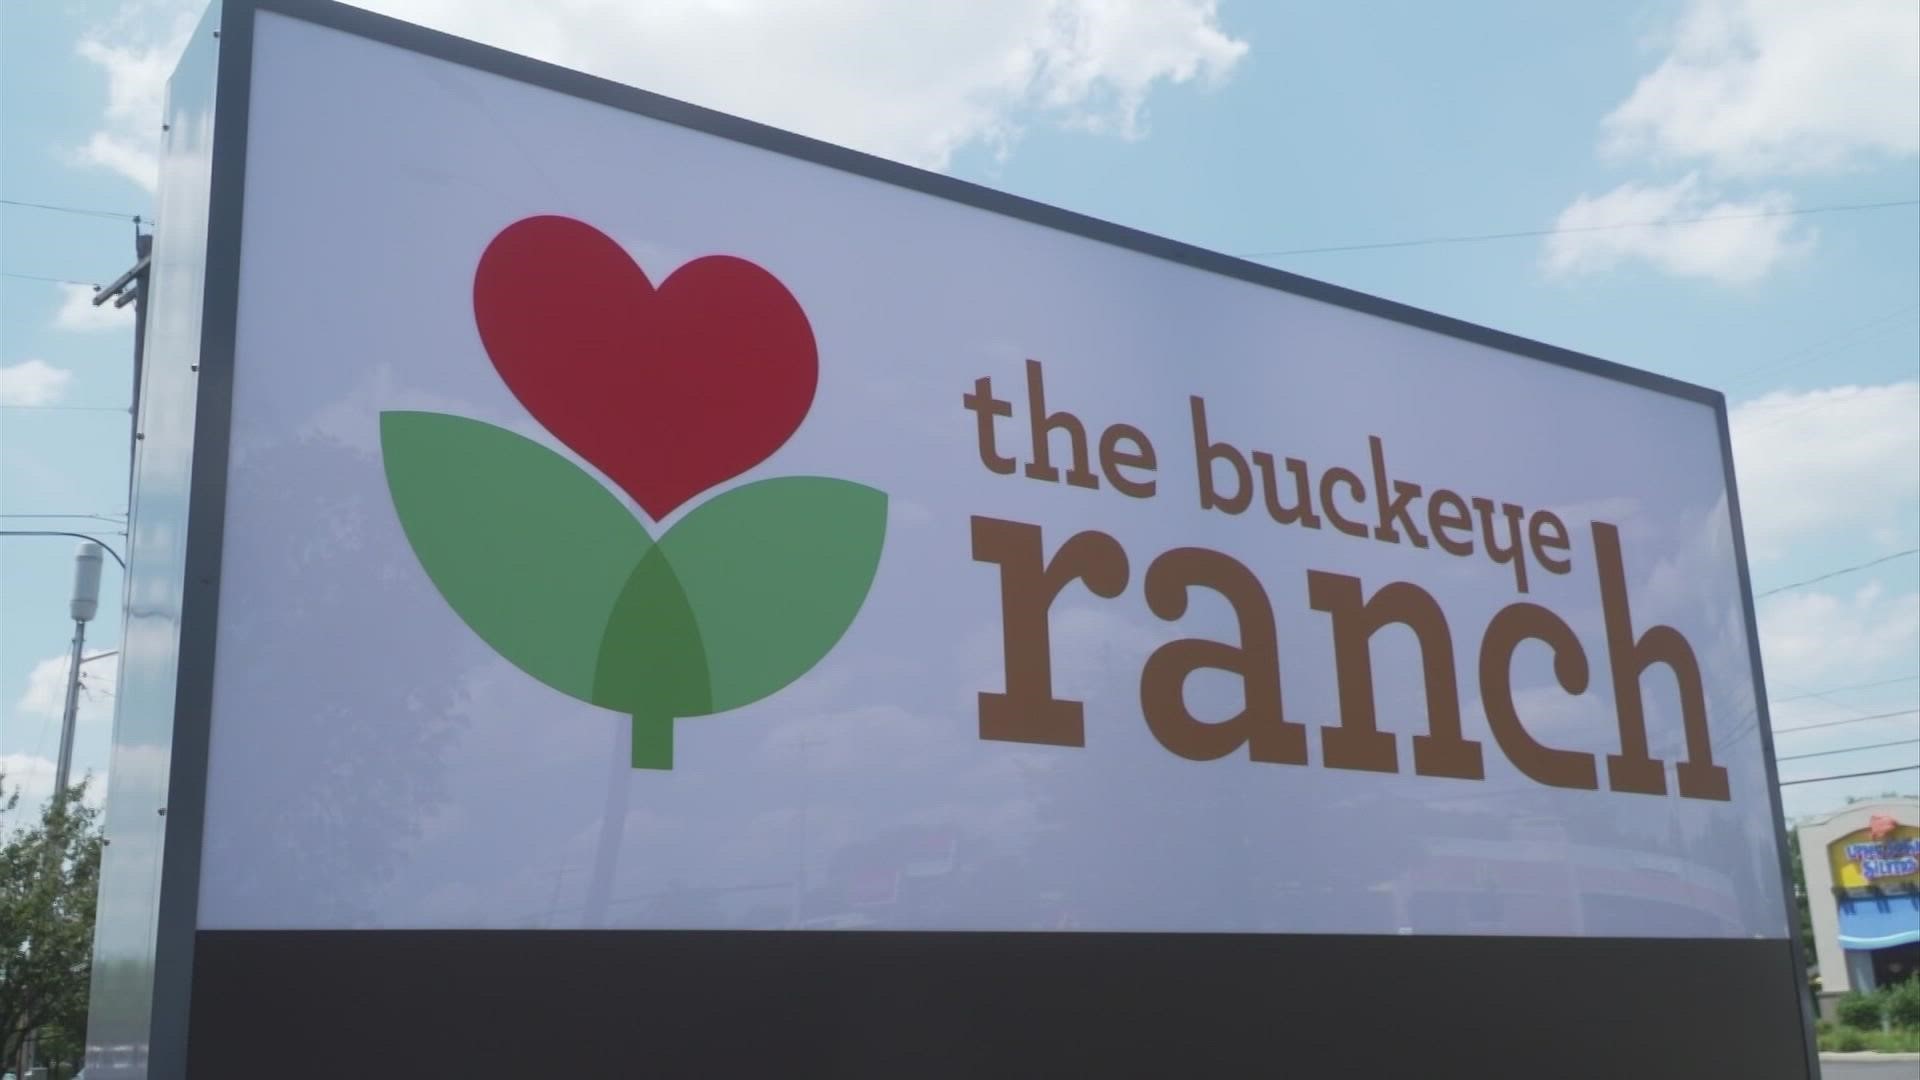 The Buckeye Ranch has become one of the country's leading providers of emotional, behavioral and mental health services for children, youth and families.